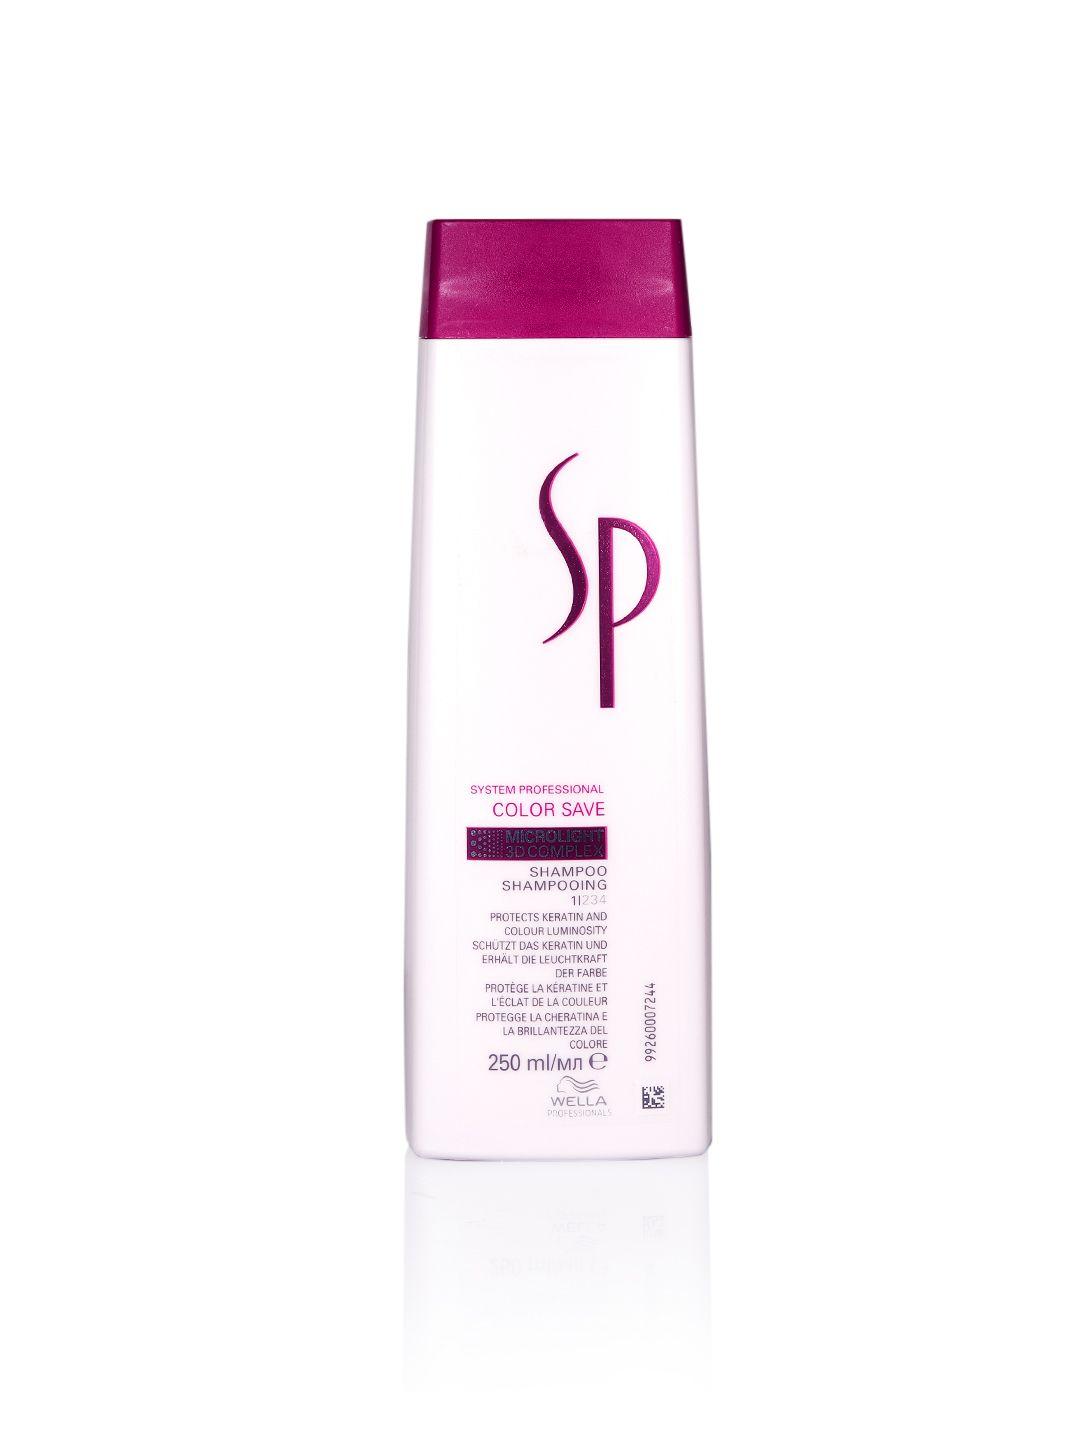 wella professionals sp color save shampoo - for coloured hair 250 ml